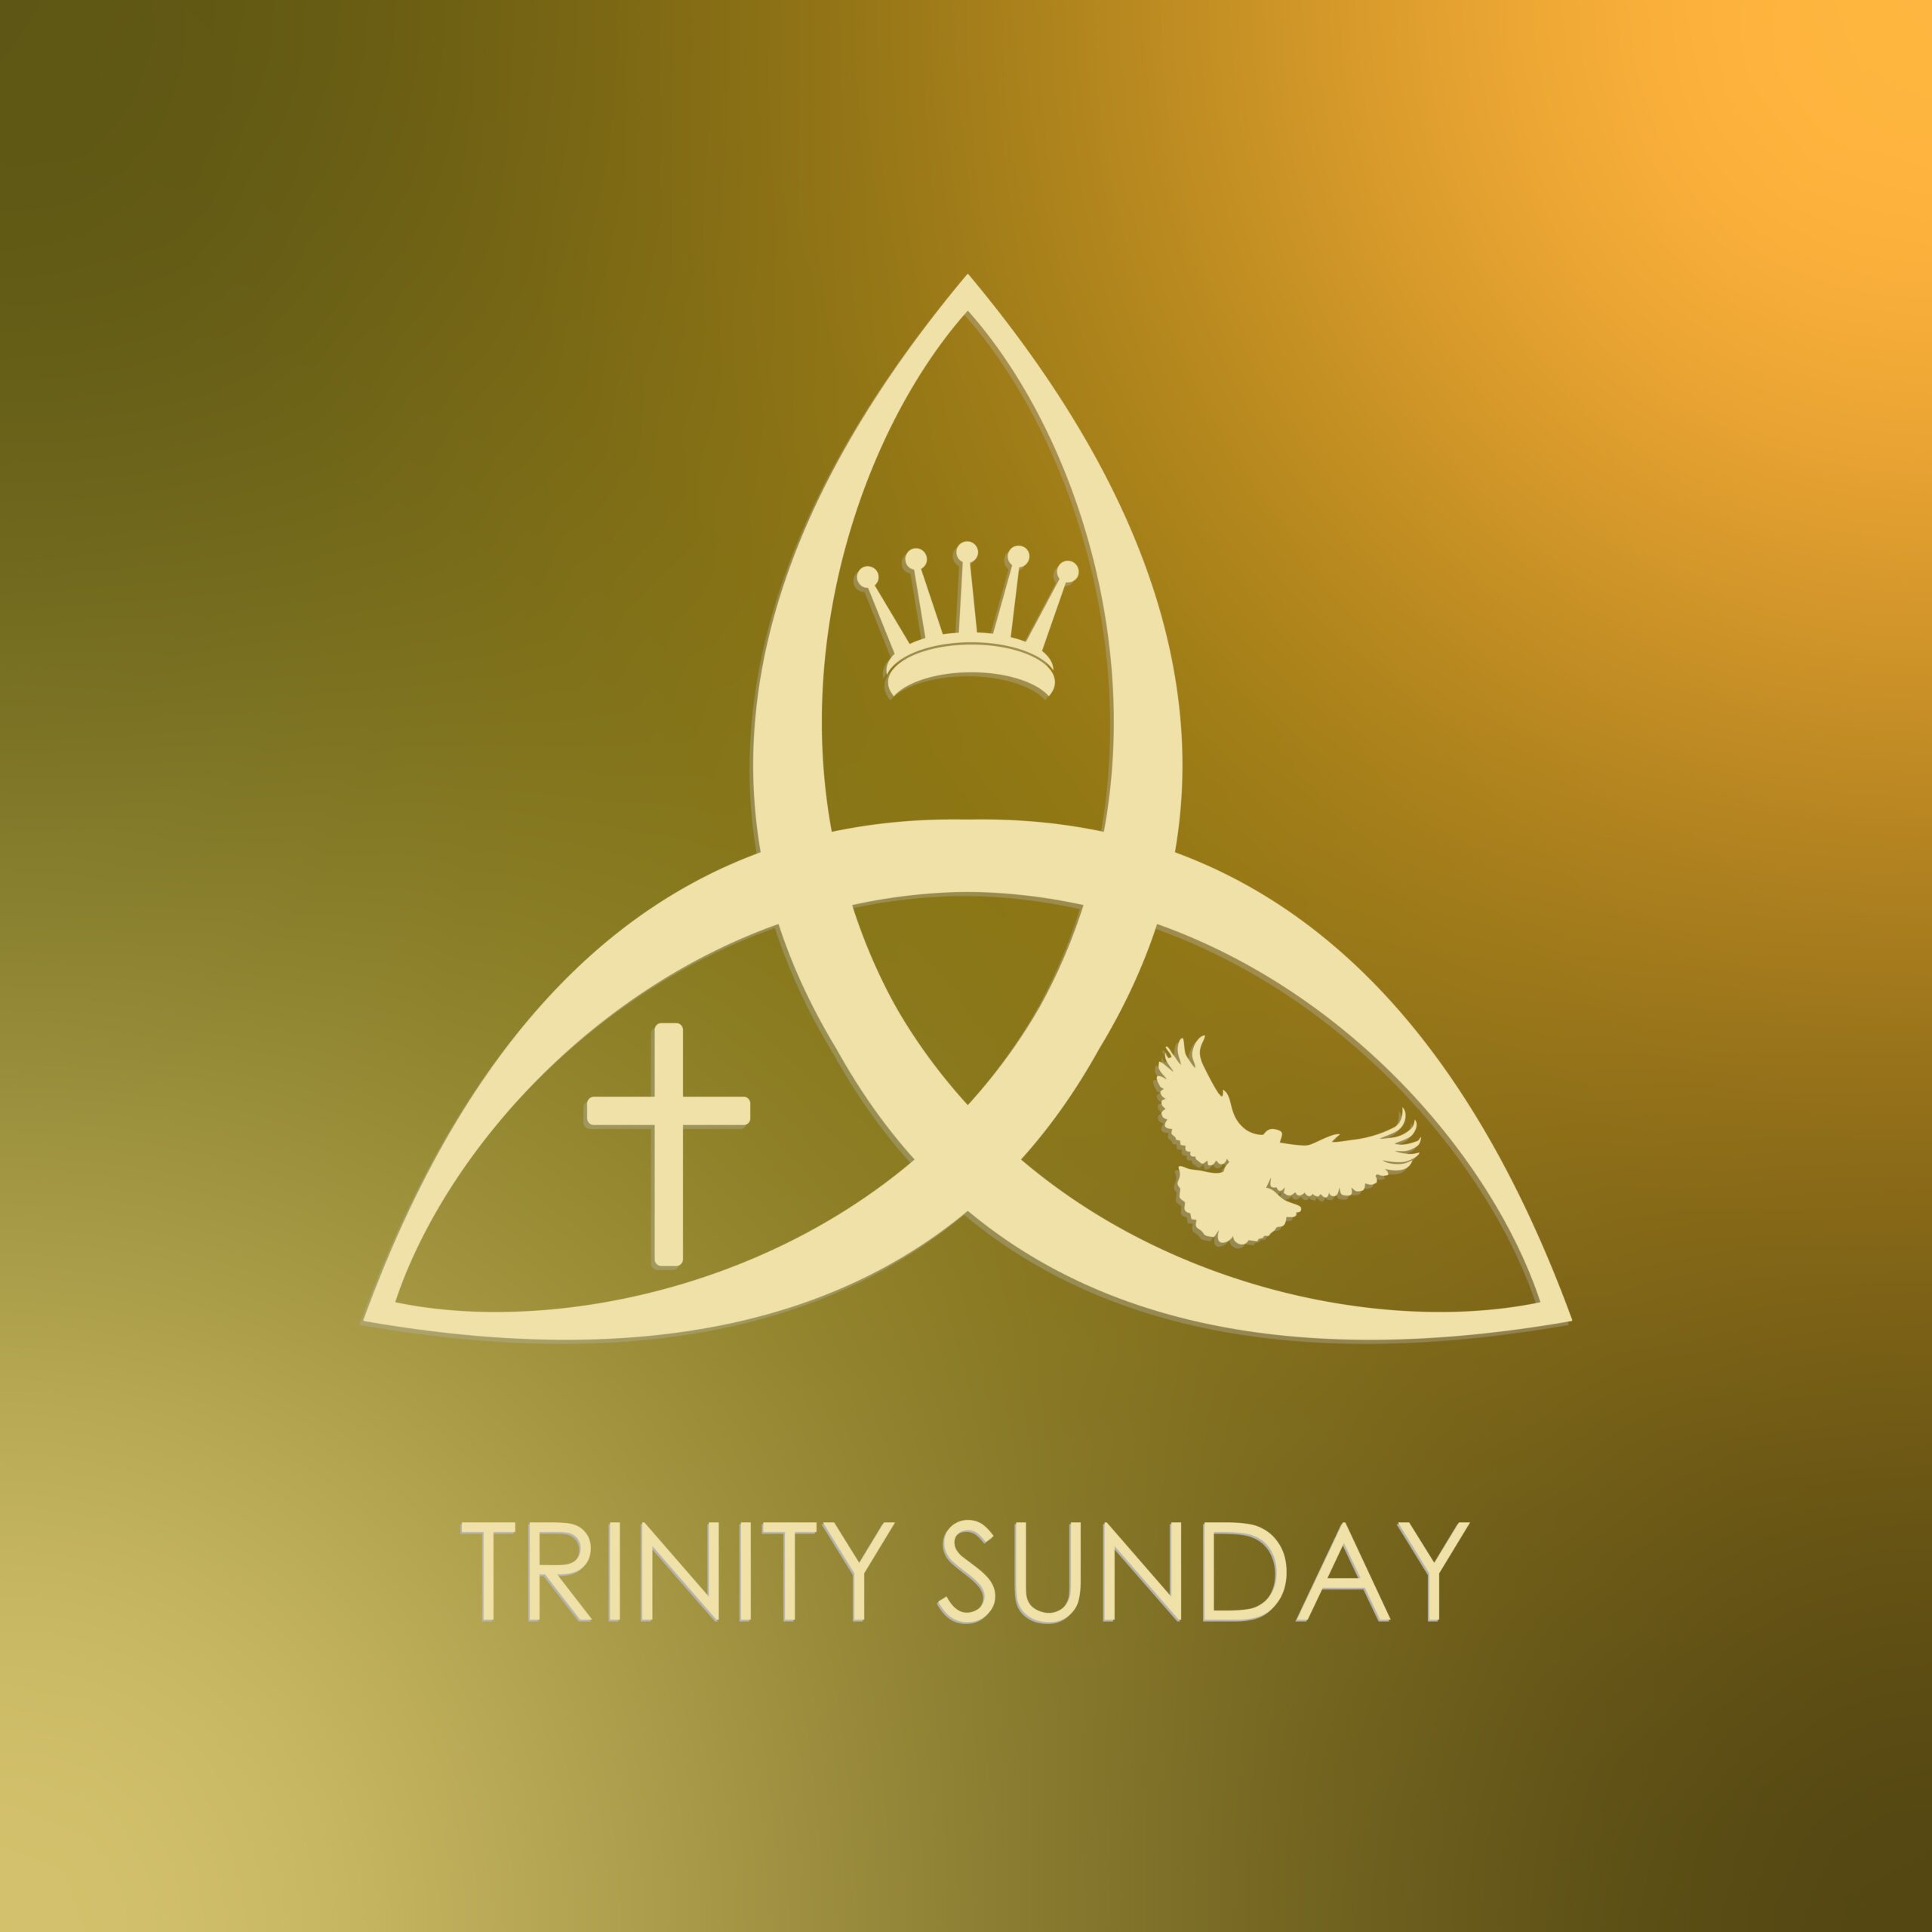 Trinity Sunday is a significant day in the Christian liturgical calendar, celebrated as a reminder of the profound mystery of the Holy Trinity - the Father, the Son, and the Holy Spirit. It is observed on the first Sunday after Pentecost, marking it as a time of reflection on the nature of God and the Christian faith.